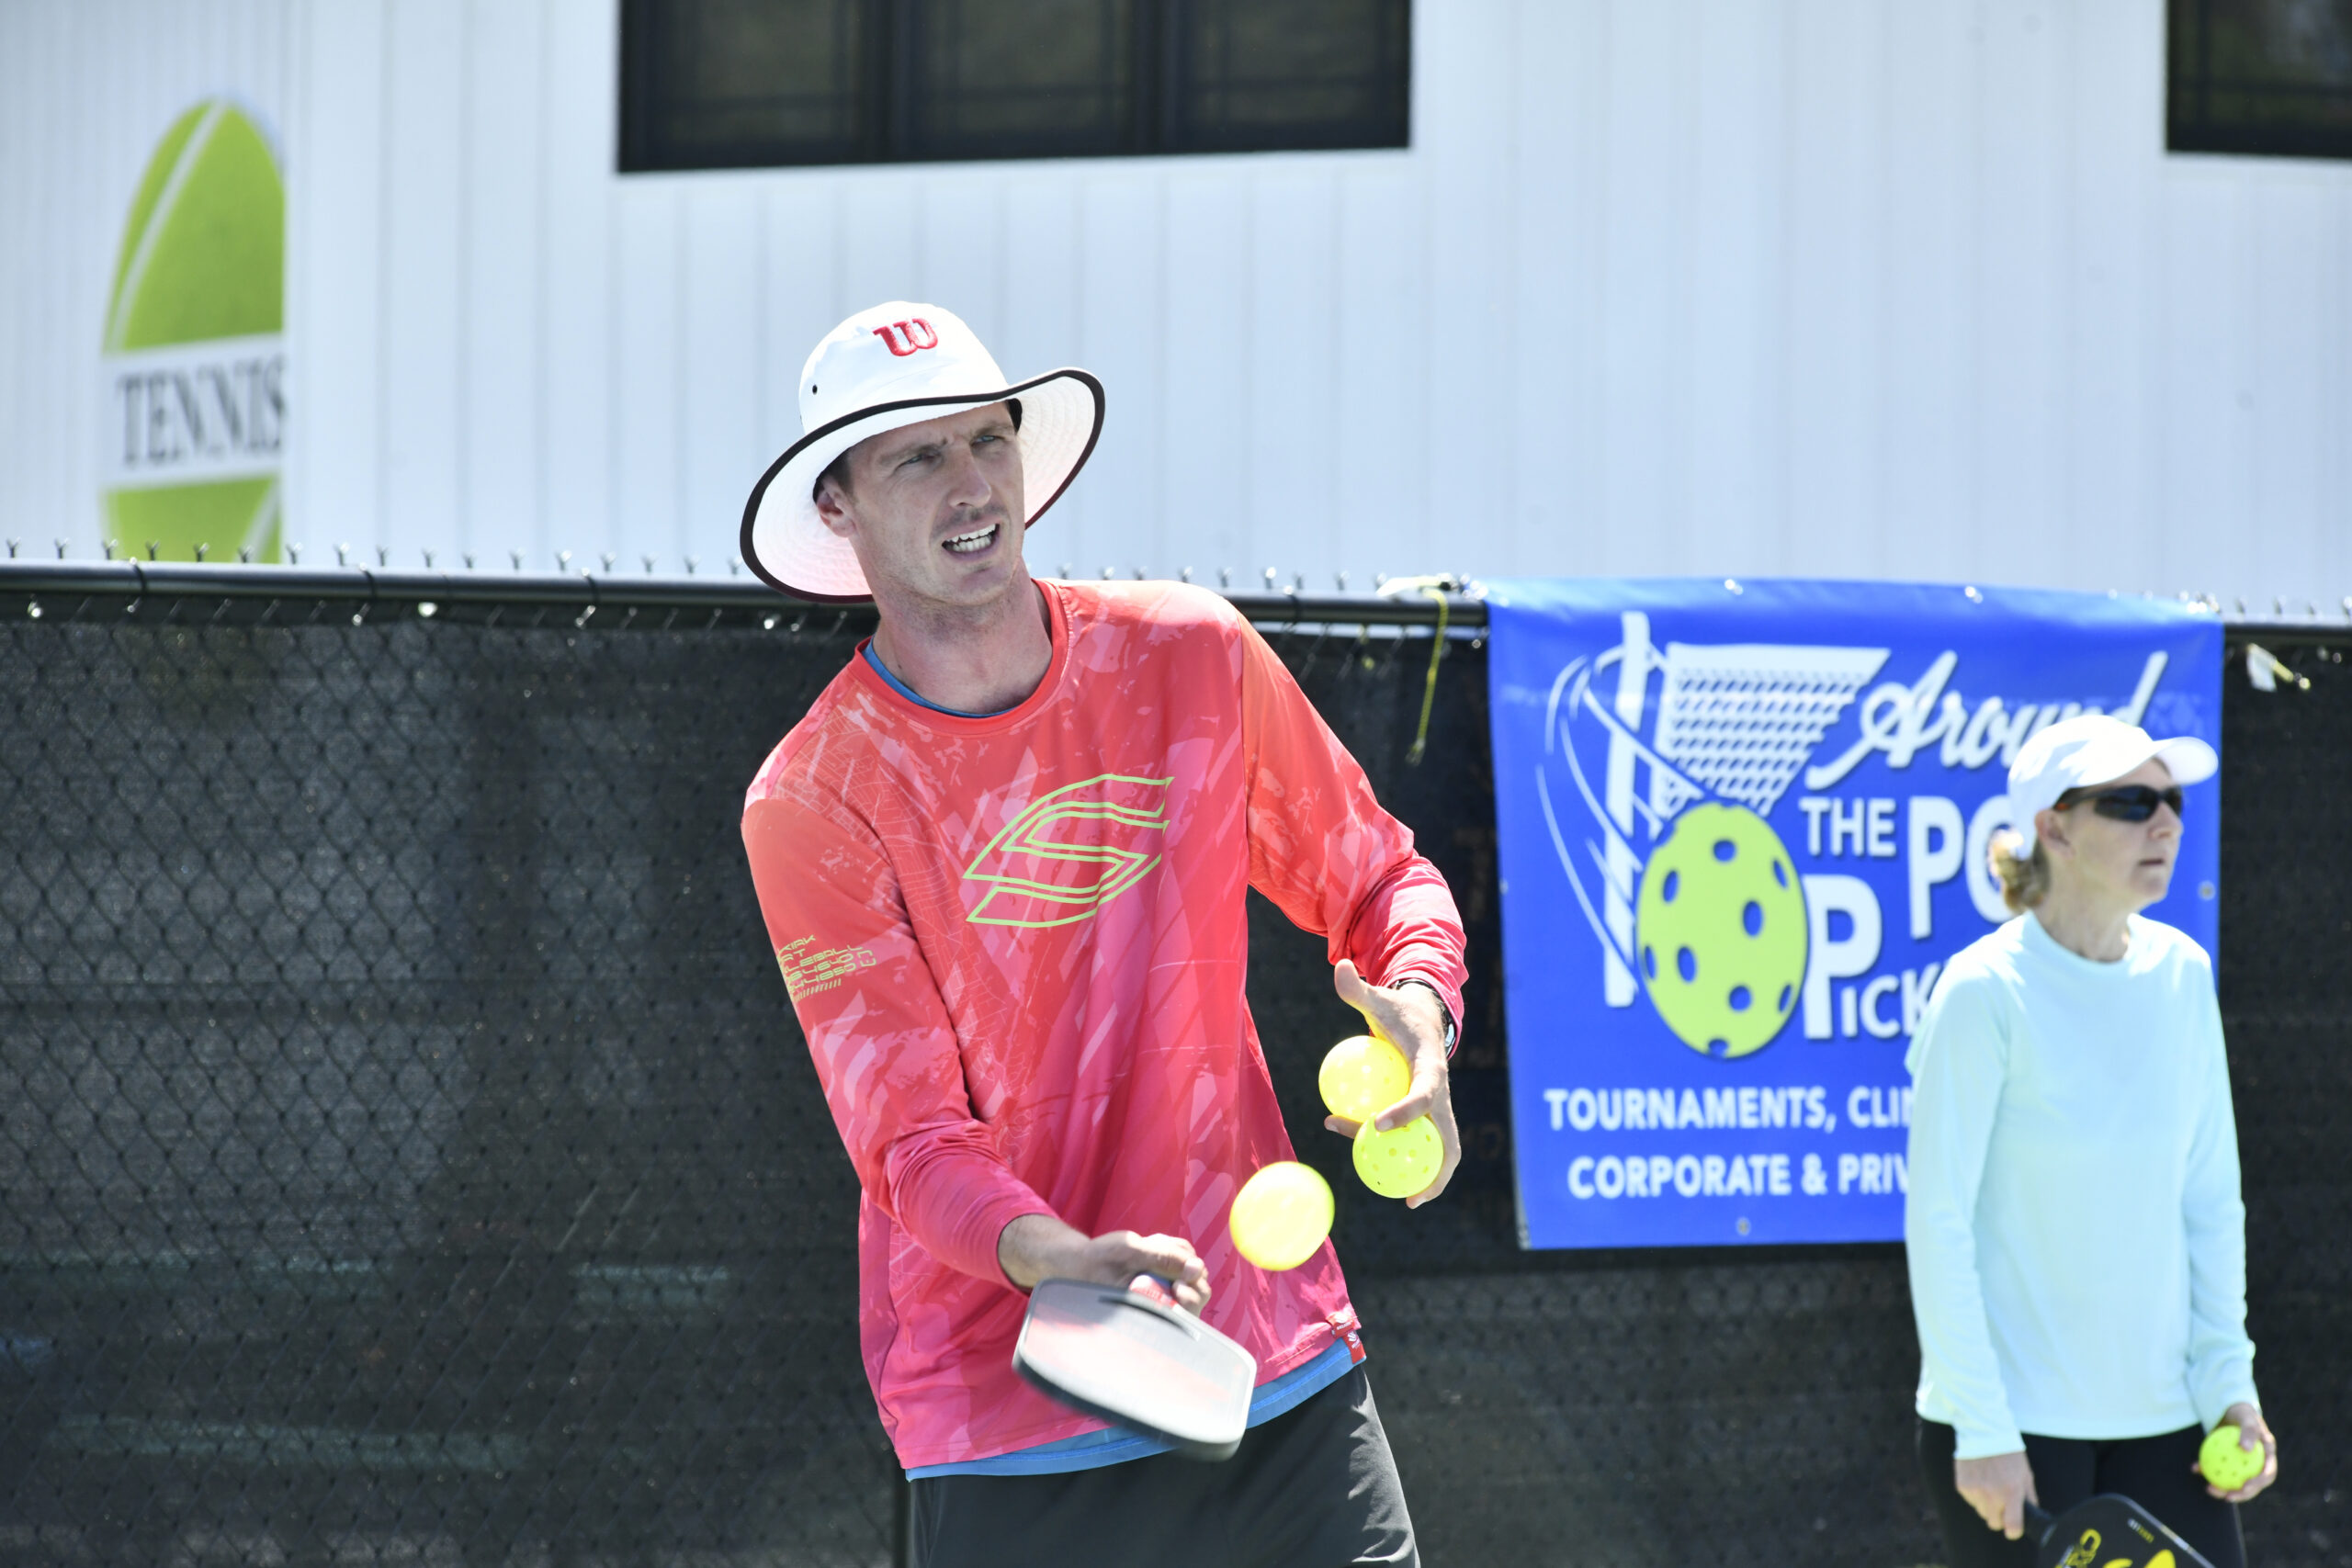 Andrei Daescu works with students at a Pickleball clinic at Tennis At The Barn in Westhampton on Thursday afternoon.   DANA SHAW